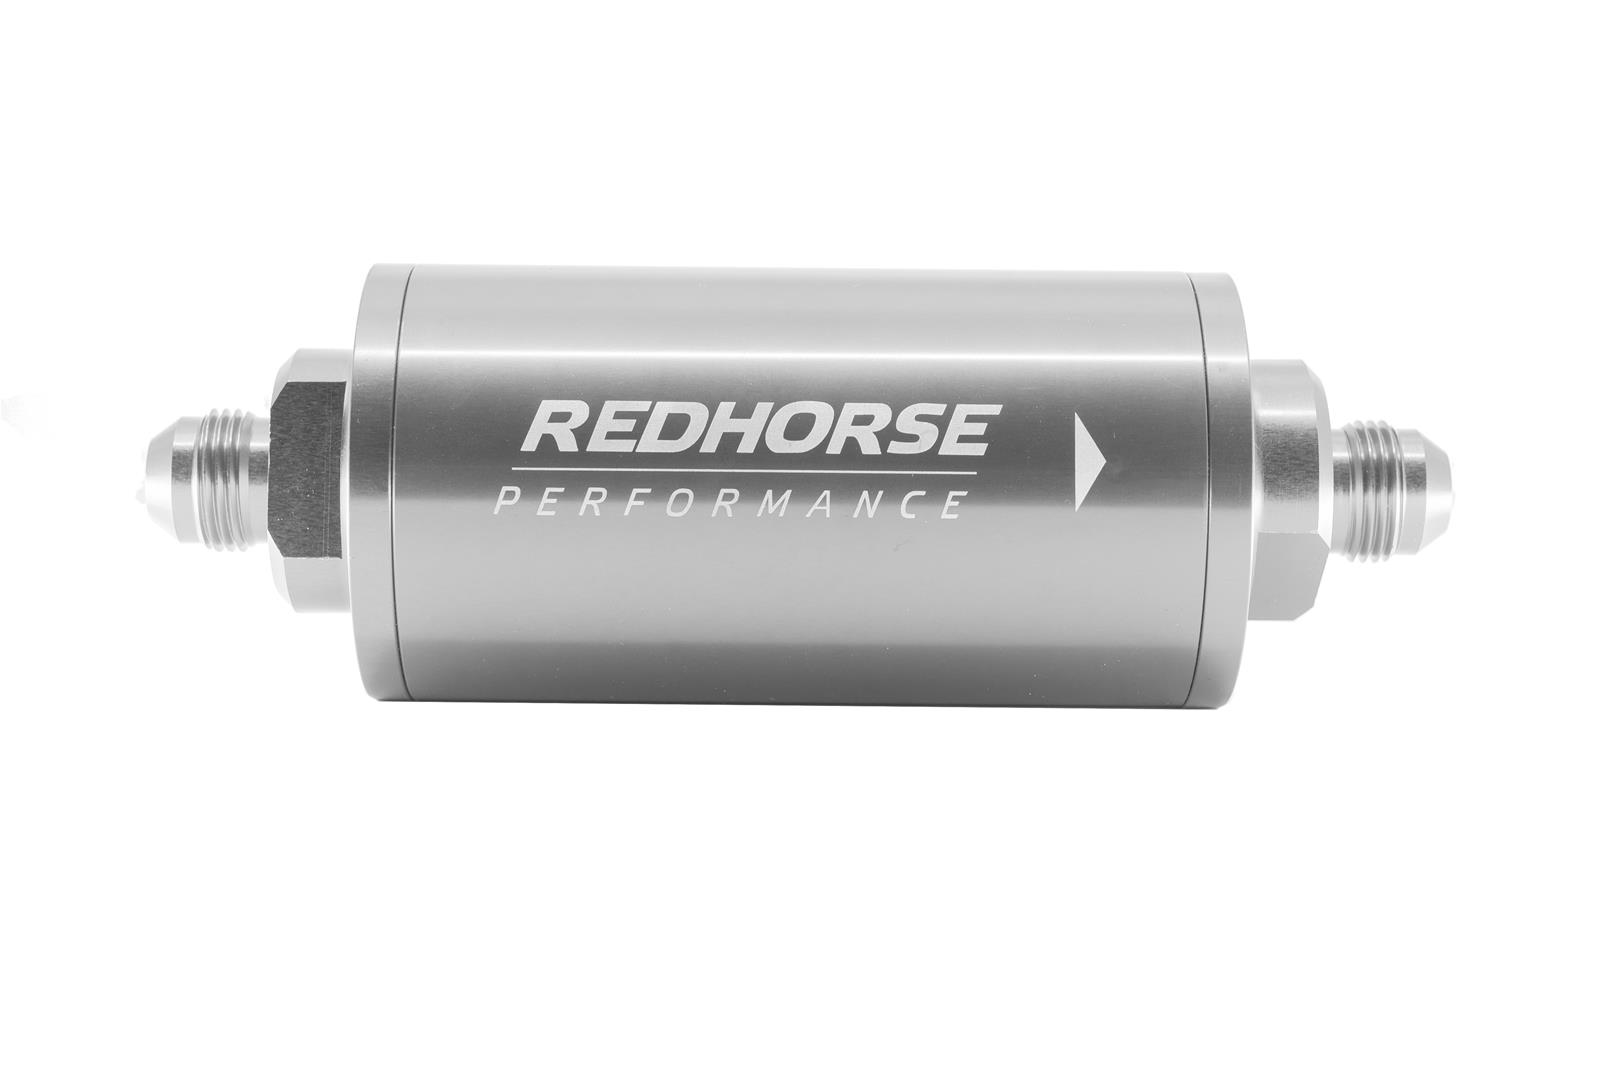 Redhorse Performance 4651-12-5-10 6in Cylindrical In-Line Race Fuel Filter w/ 10 Micron S.S. element - 12 AN